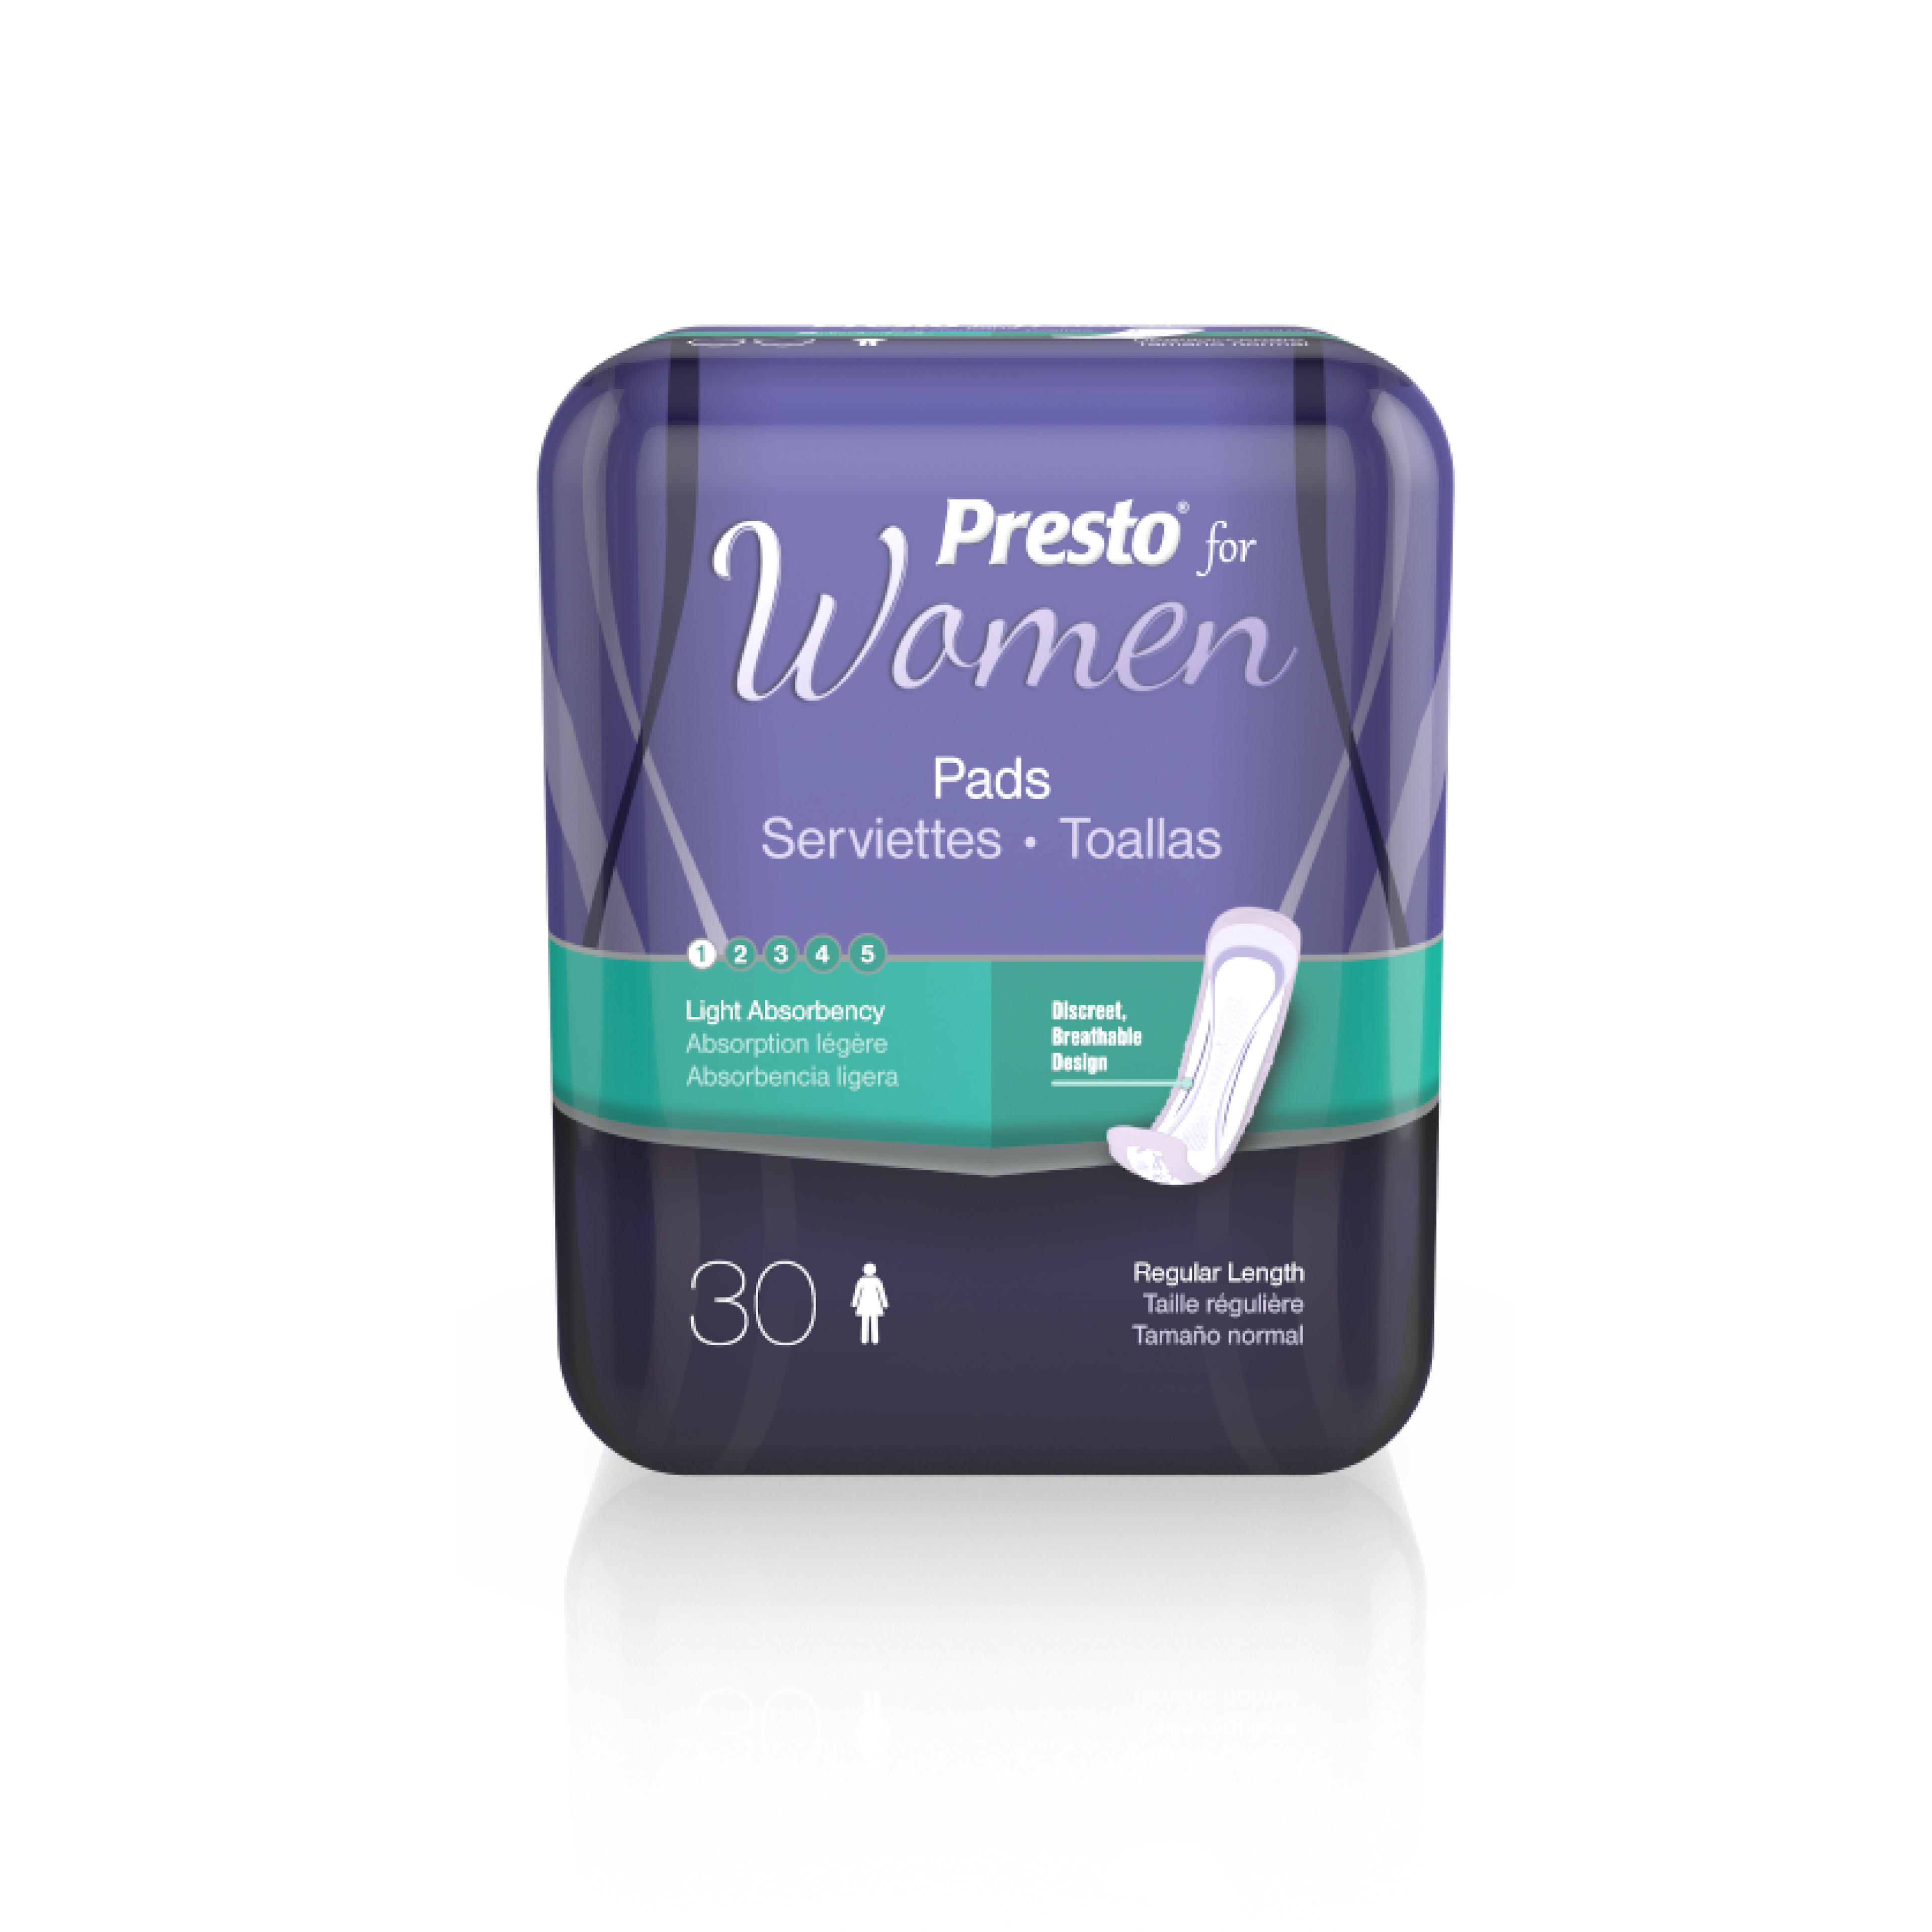 Presto Incontinence Pads for Women, Light Absorbency